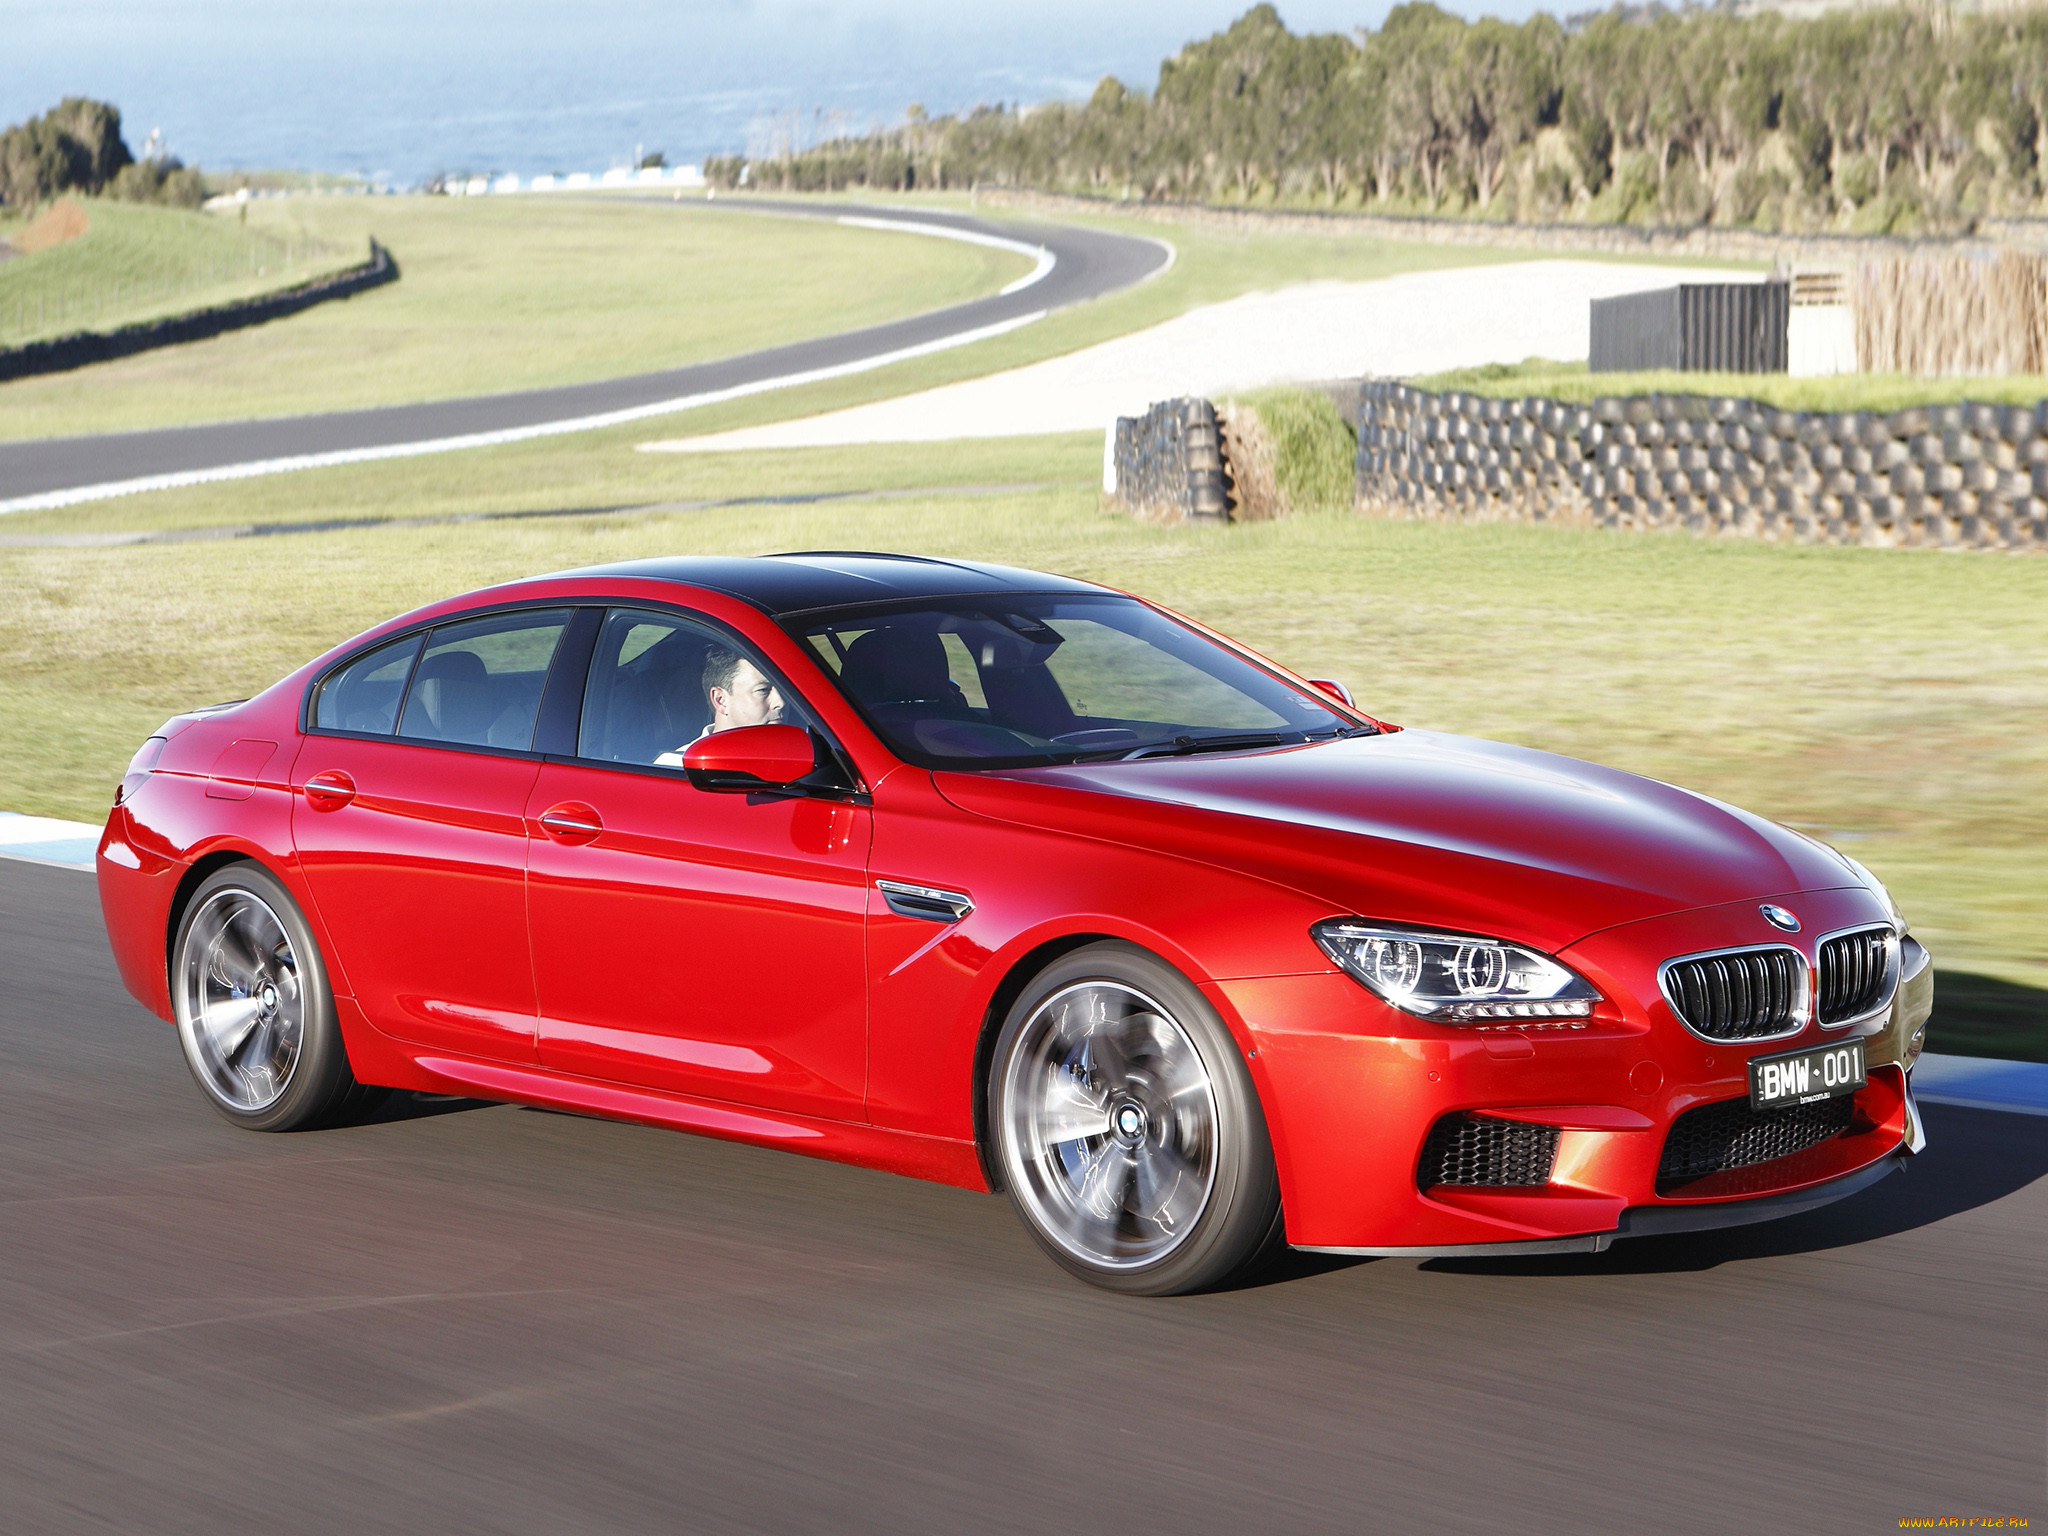 Bmw 6 m. BMW m6 Coupe. BMW m6 Gran Coupe. BMW m6 Coupe 2013. BMW 6 f06 Gran Coupe Red.